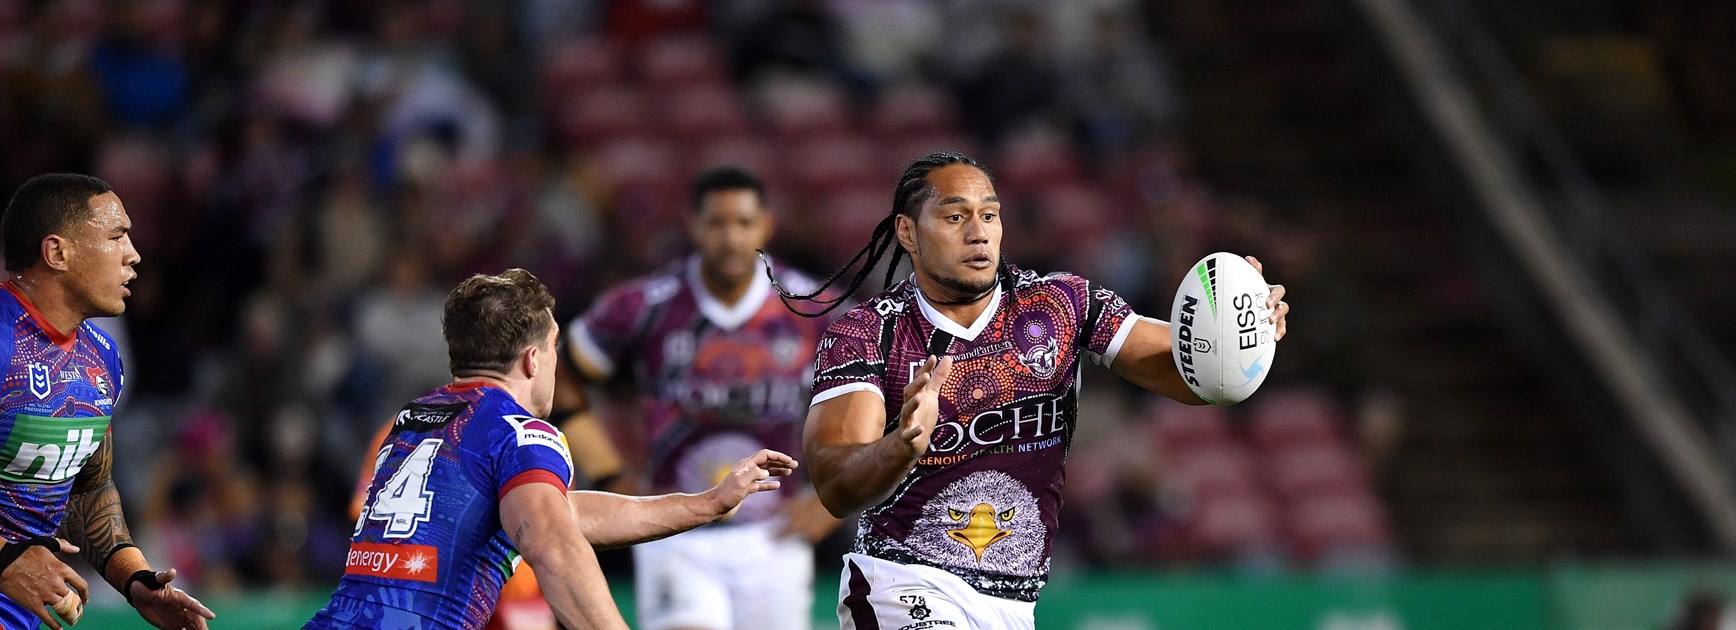 Sea Eagles go down 18-10 to Knights